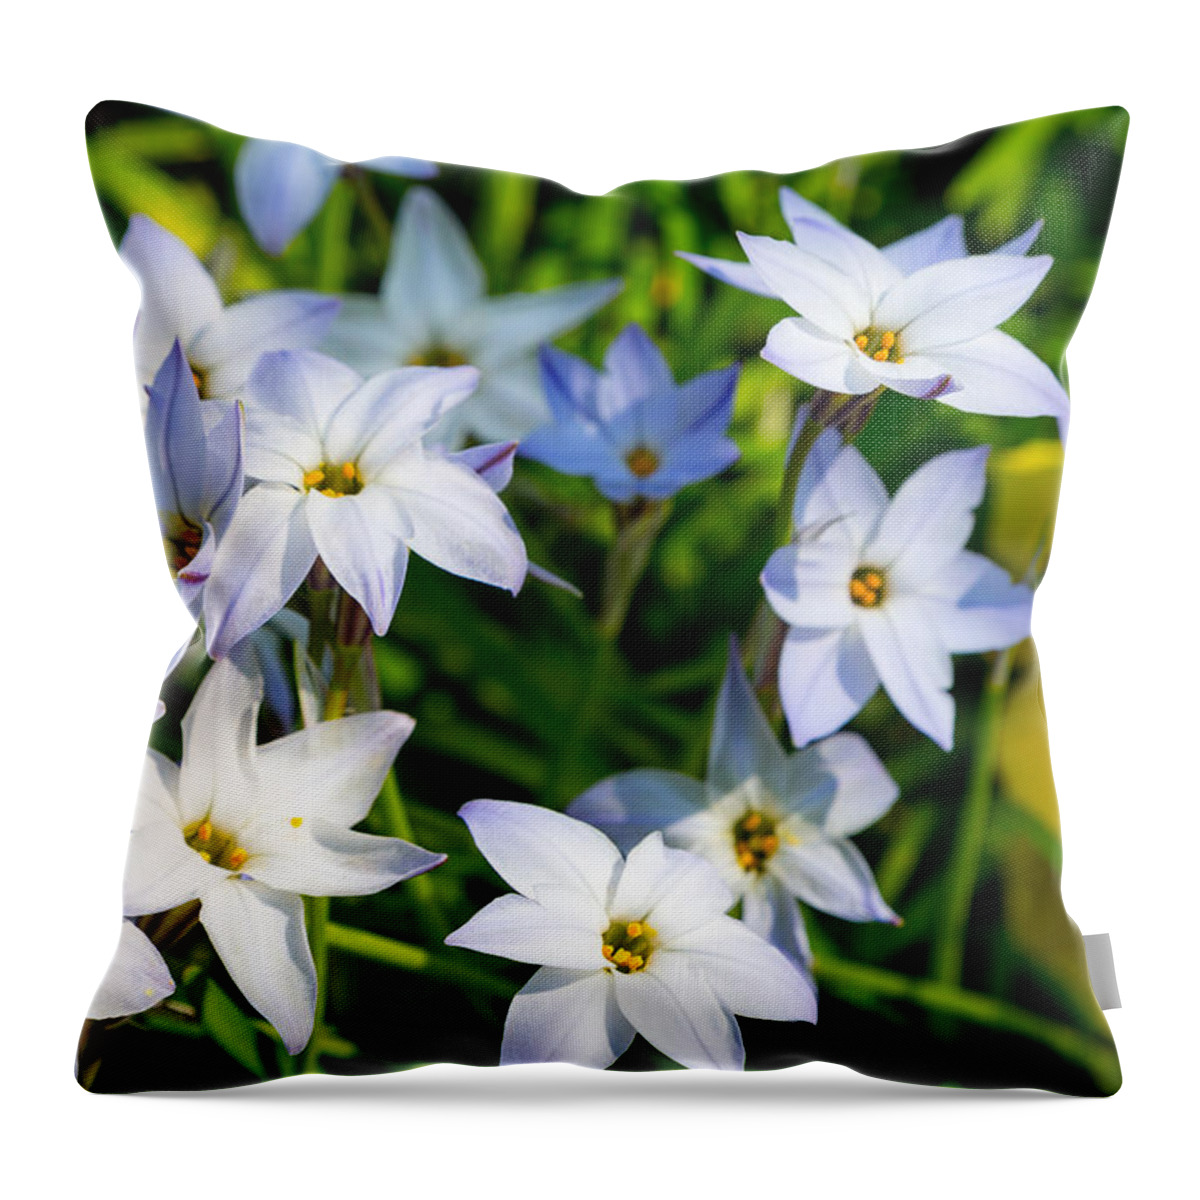 Steven Green Throw Pillow featuring the photograph Downtown Wildflowers by SR Green